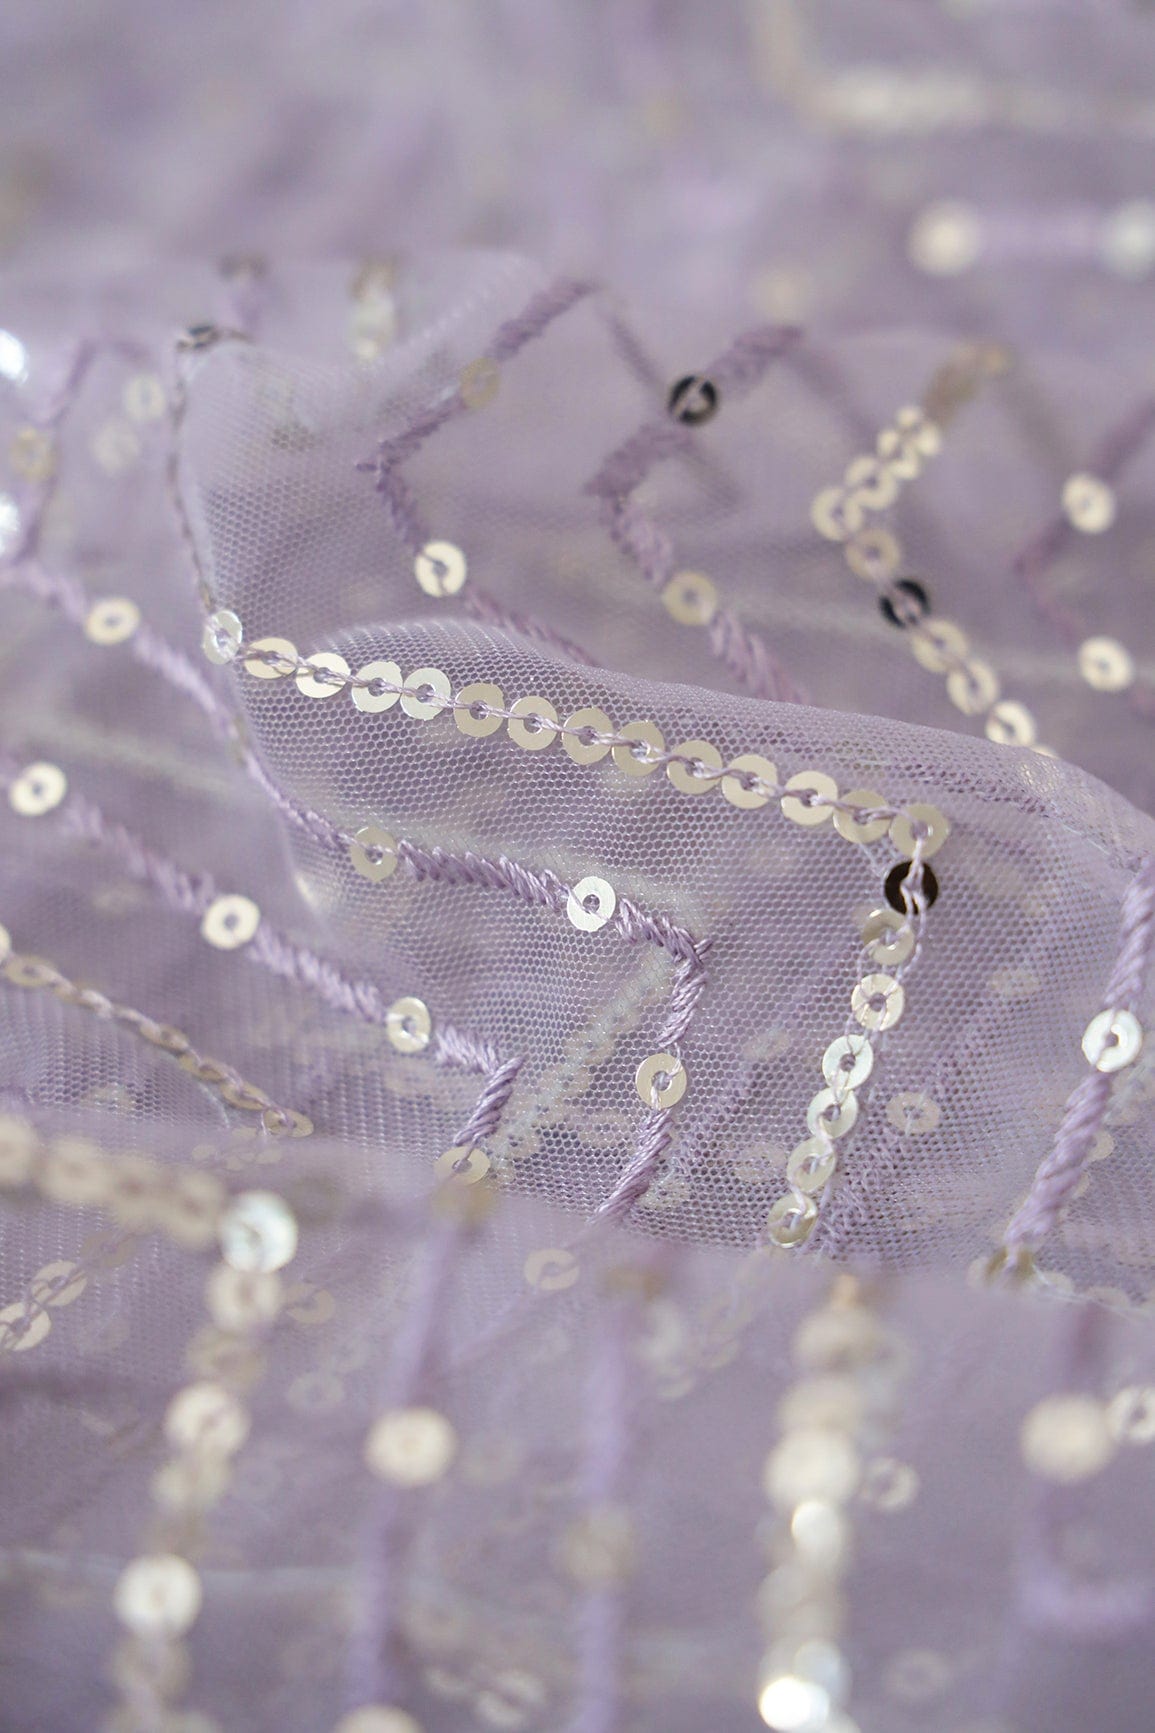 doeraa Embroidery Fabrics Gold Sequins With Lavender Thread Chevron Embroidery Work On Lavender Soft Net Fabric